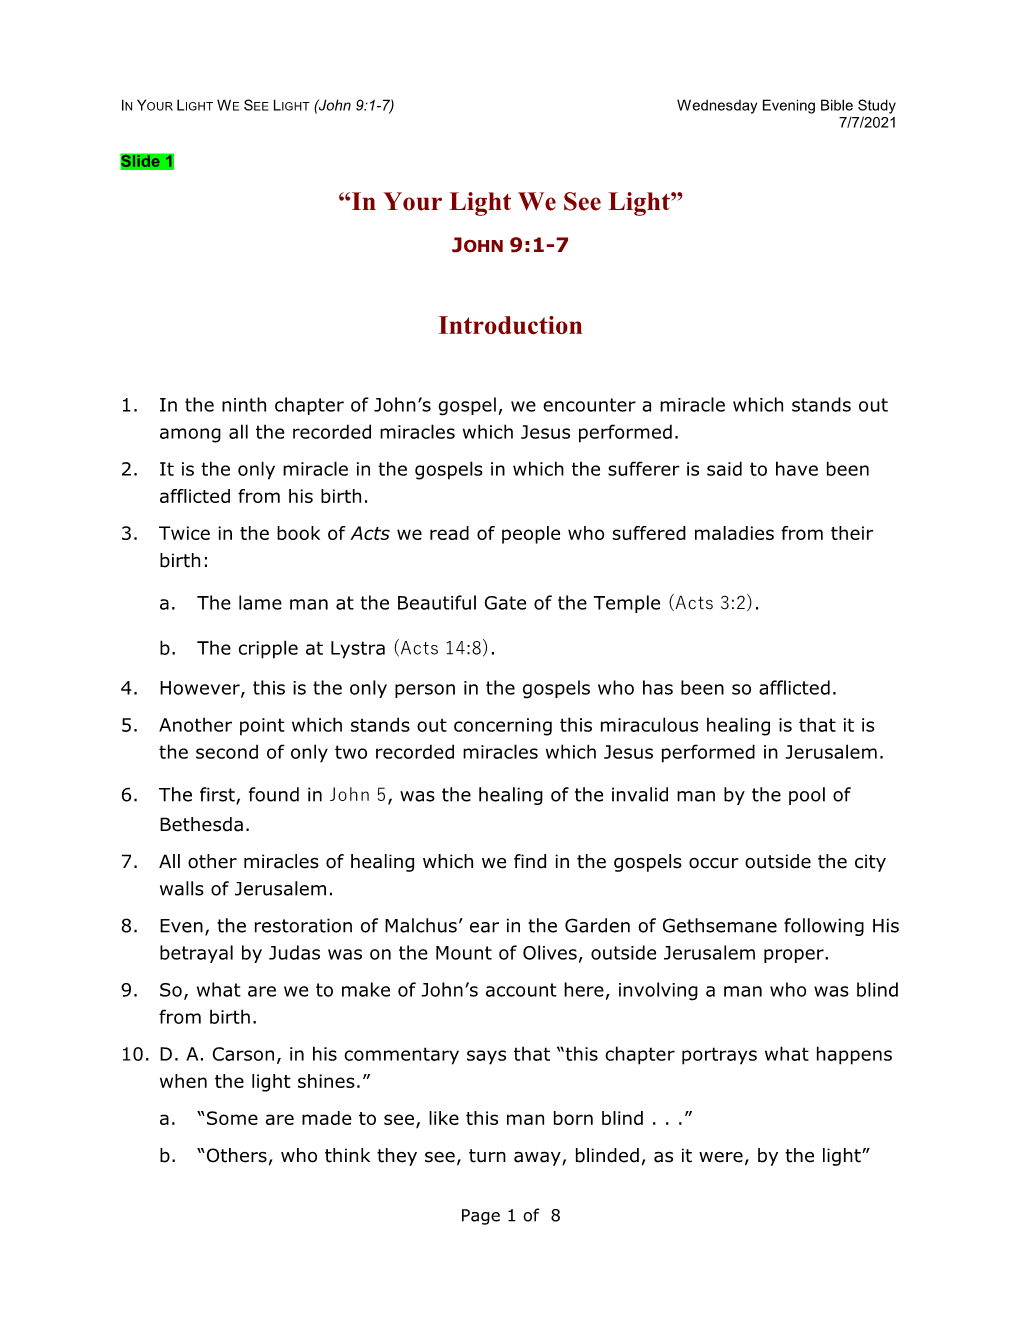 “In Your Light We See Light” Introduction